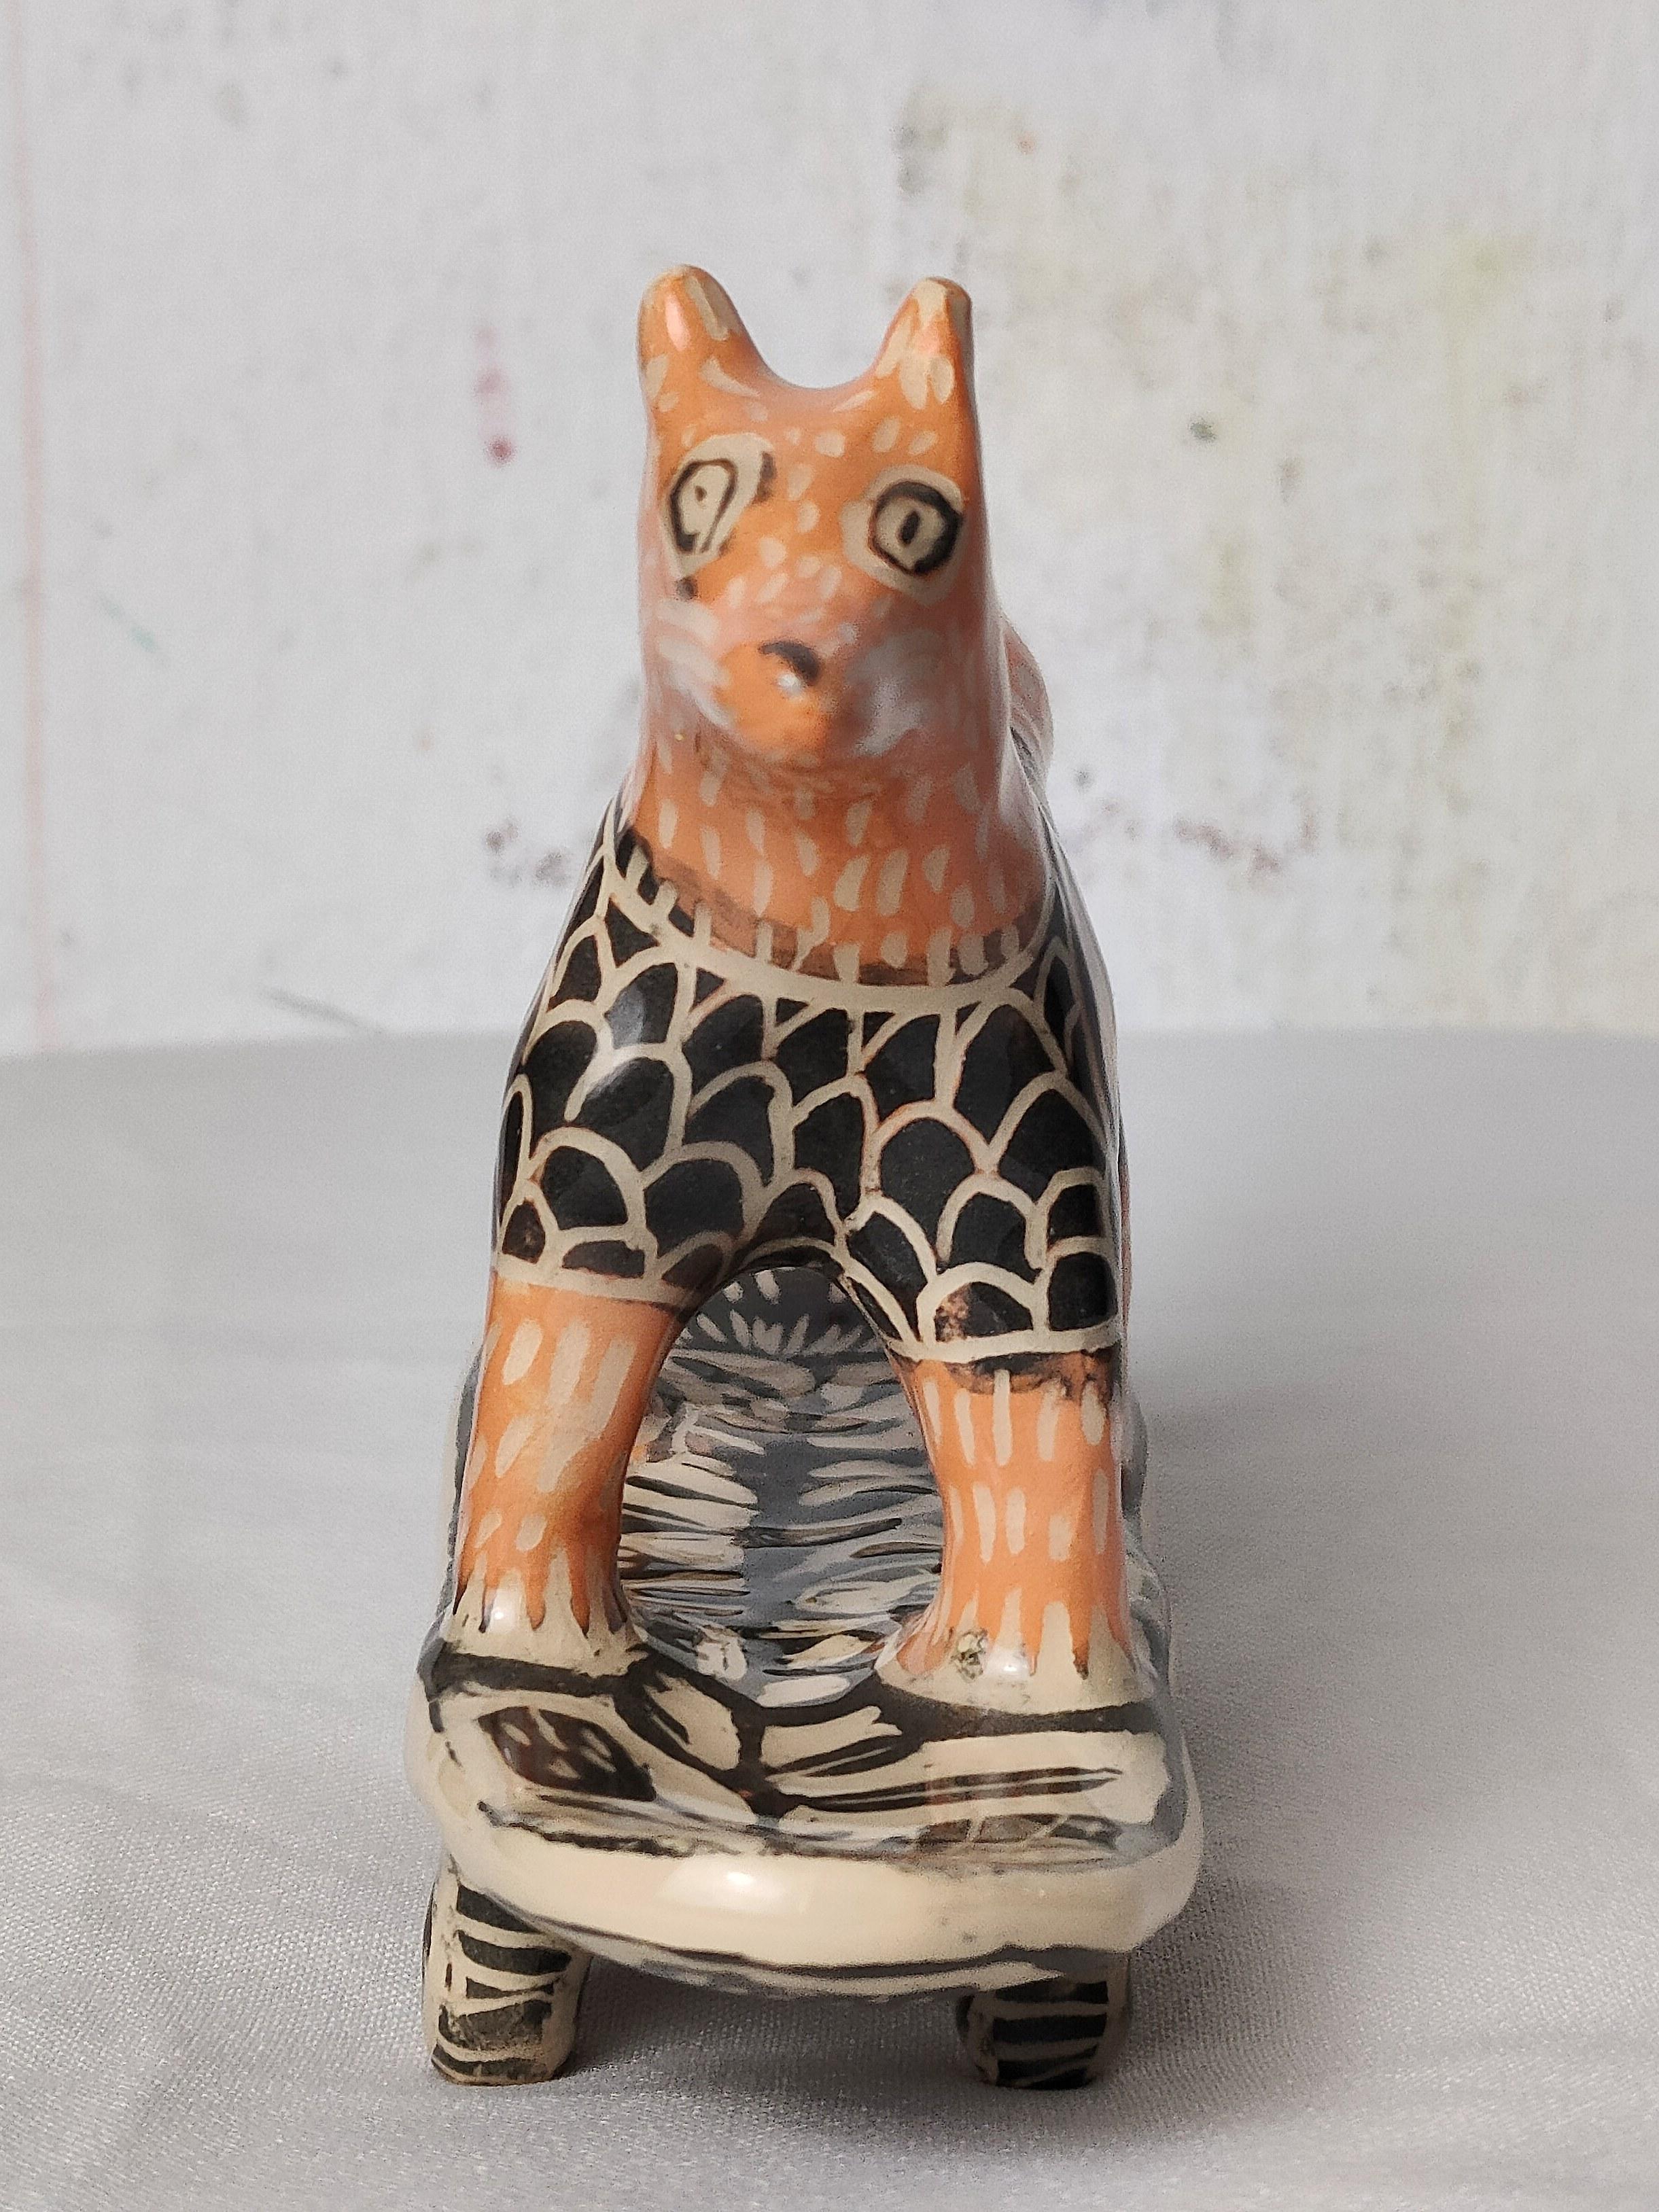 It is number 4 of a series of 5 (each piece is a different size and details in the decoration)
Clay,engobe,glaze
This work is hand-built and totally unique.
The work is decorated with engobe and glaze. The work is then fired in an electric kiln